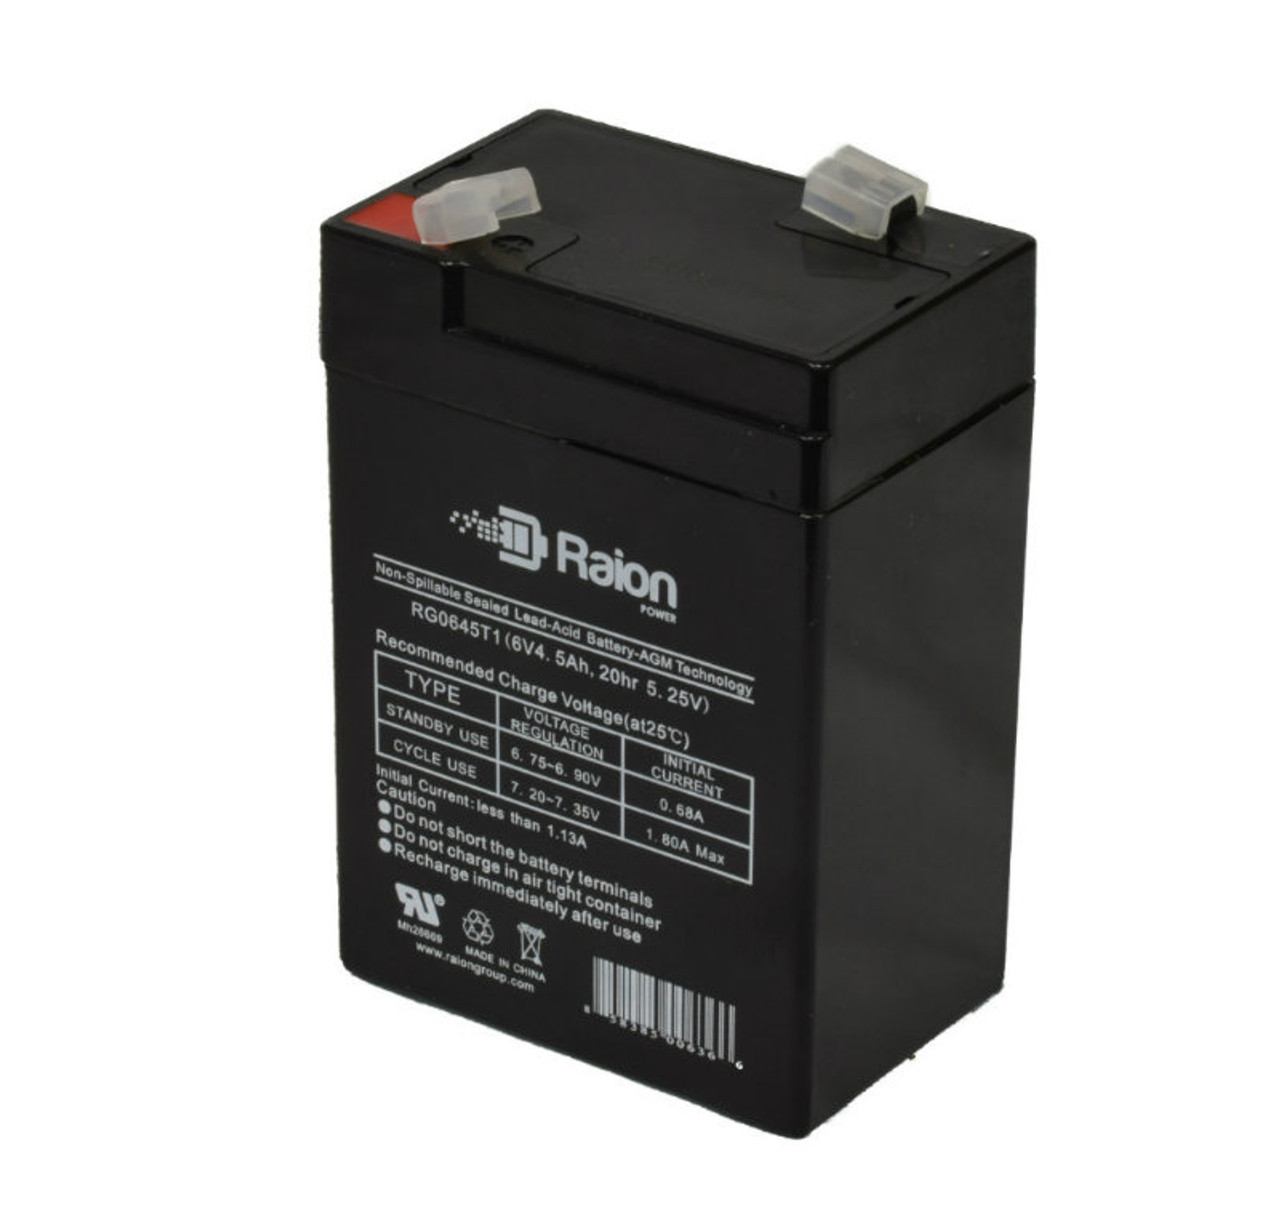 Raion Power RG0645T1 6V 4.5Ah Replacement Battery Cartridge for Criticare Systems 506DX Pulse Oximeter